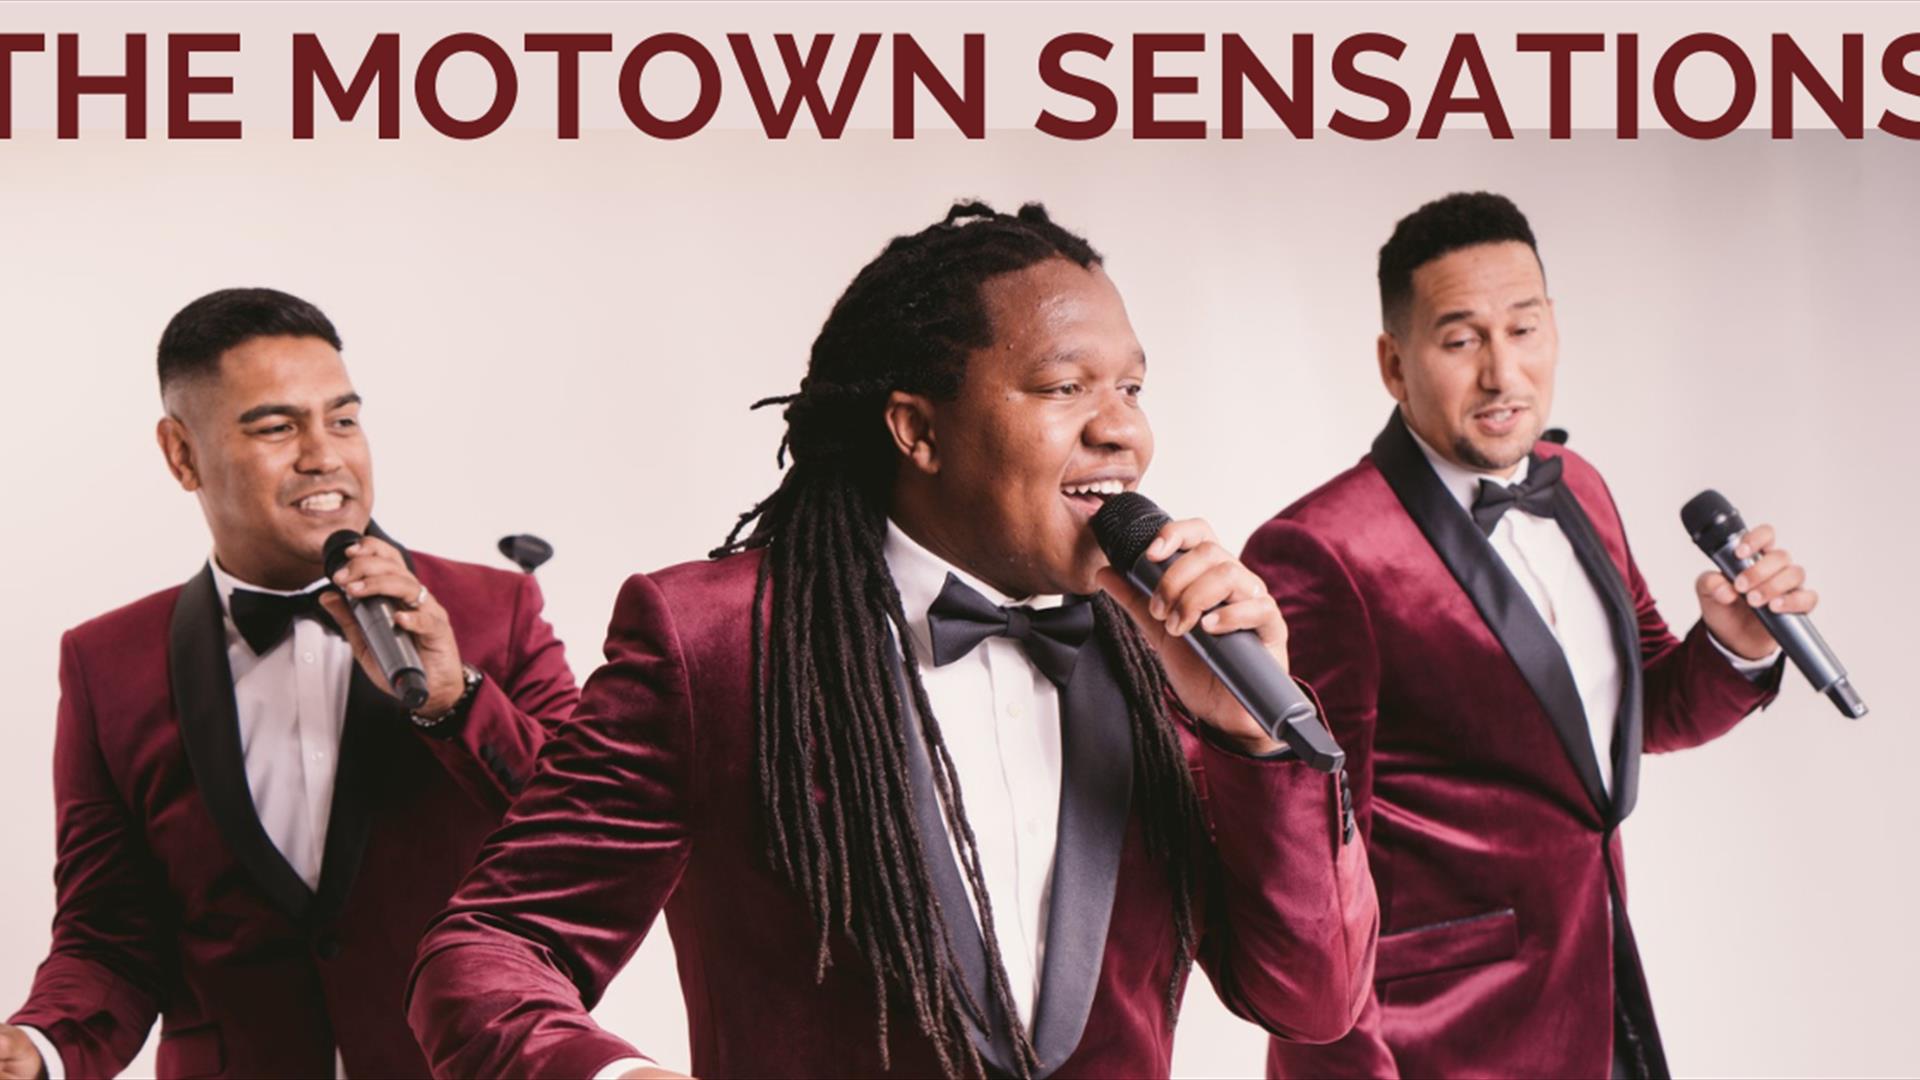 Image is of the three members of The Motown Sensations